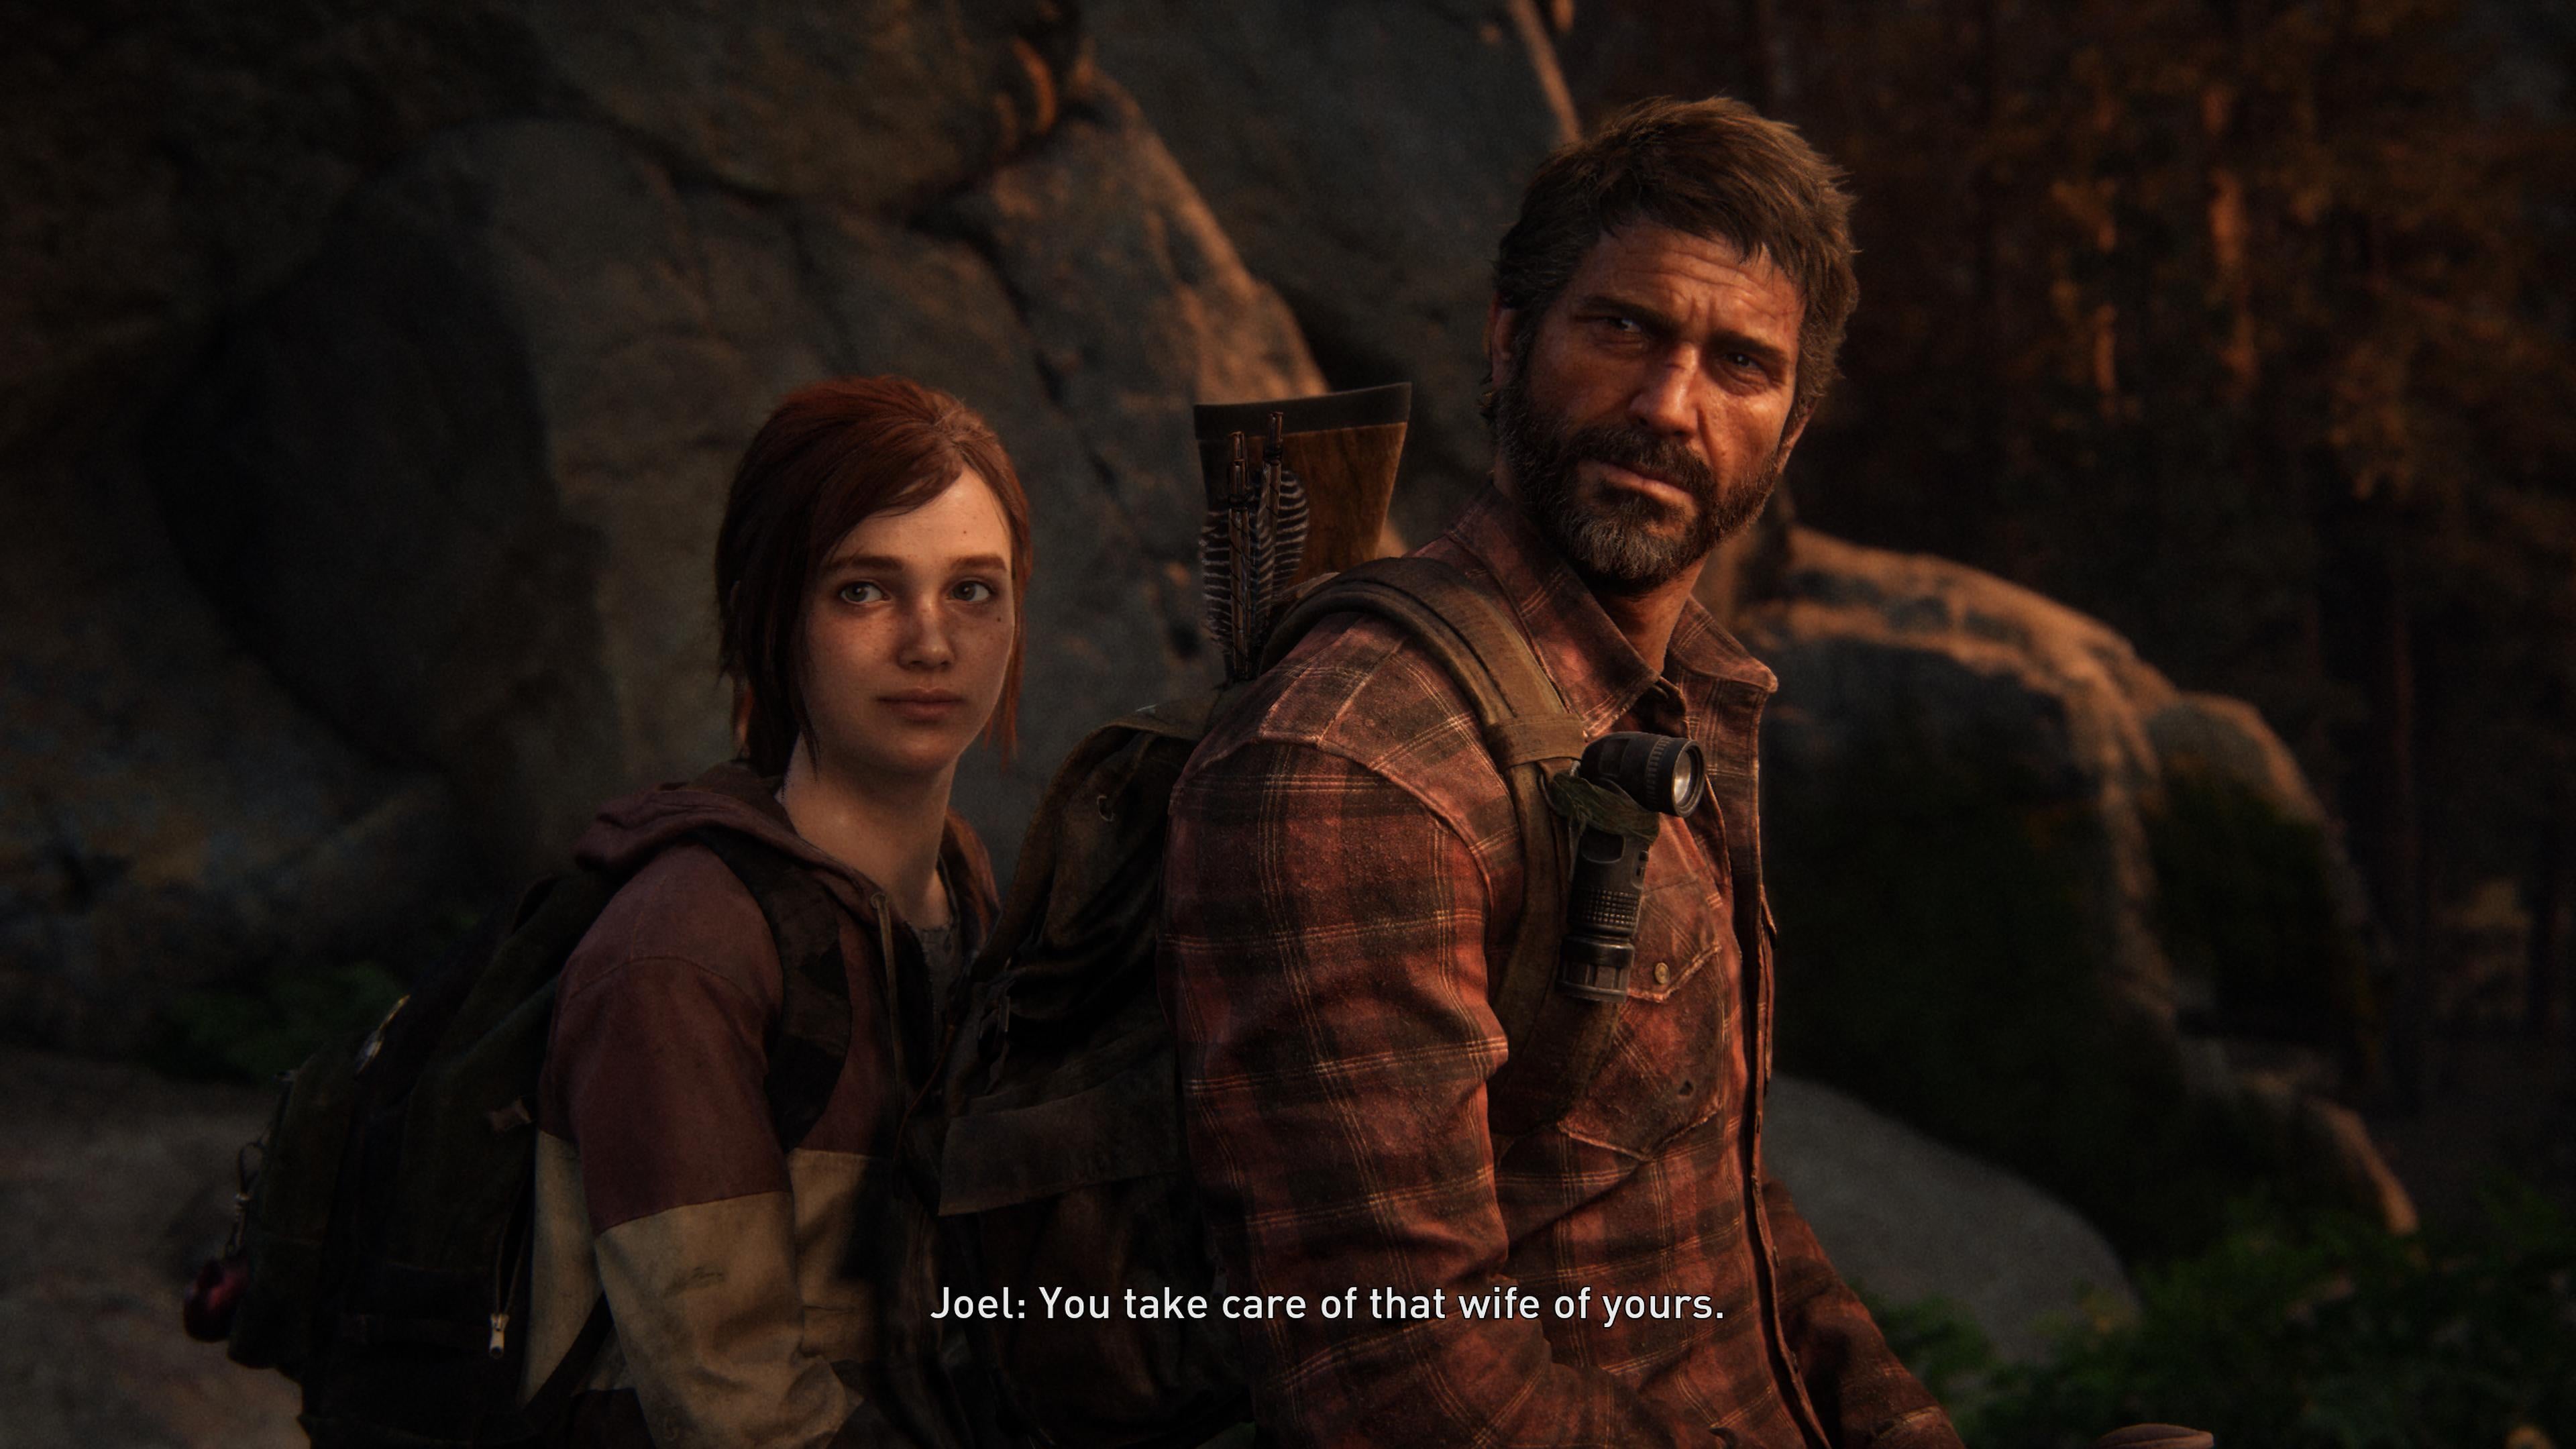 The Last of Us Part 1 - Tommy's Dam: Tommy Talks To Maria About Ellie:  Search For Ellie on Horseback 